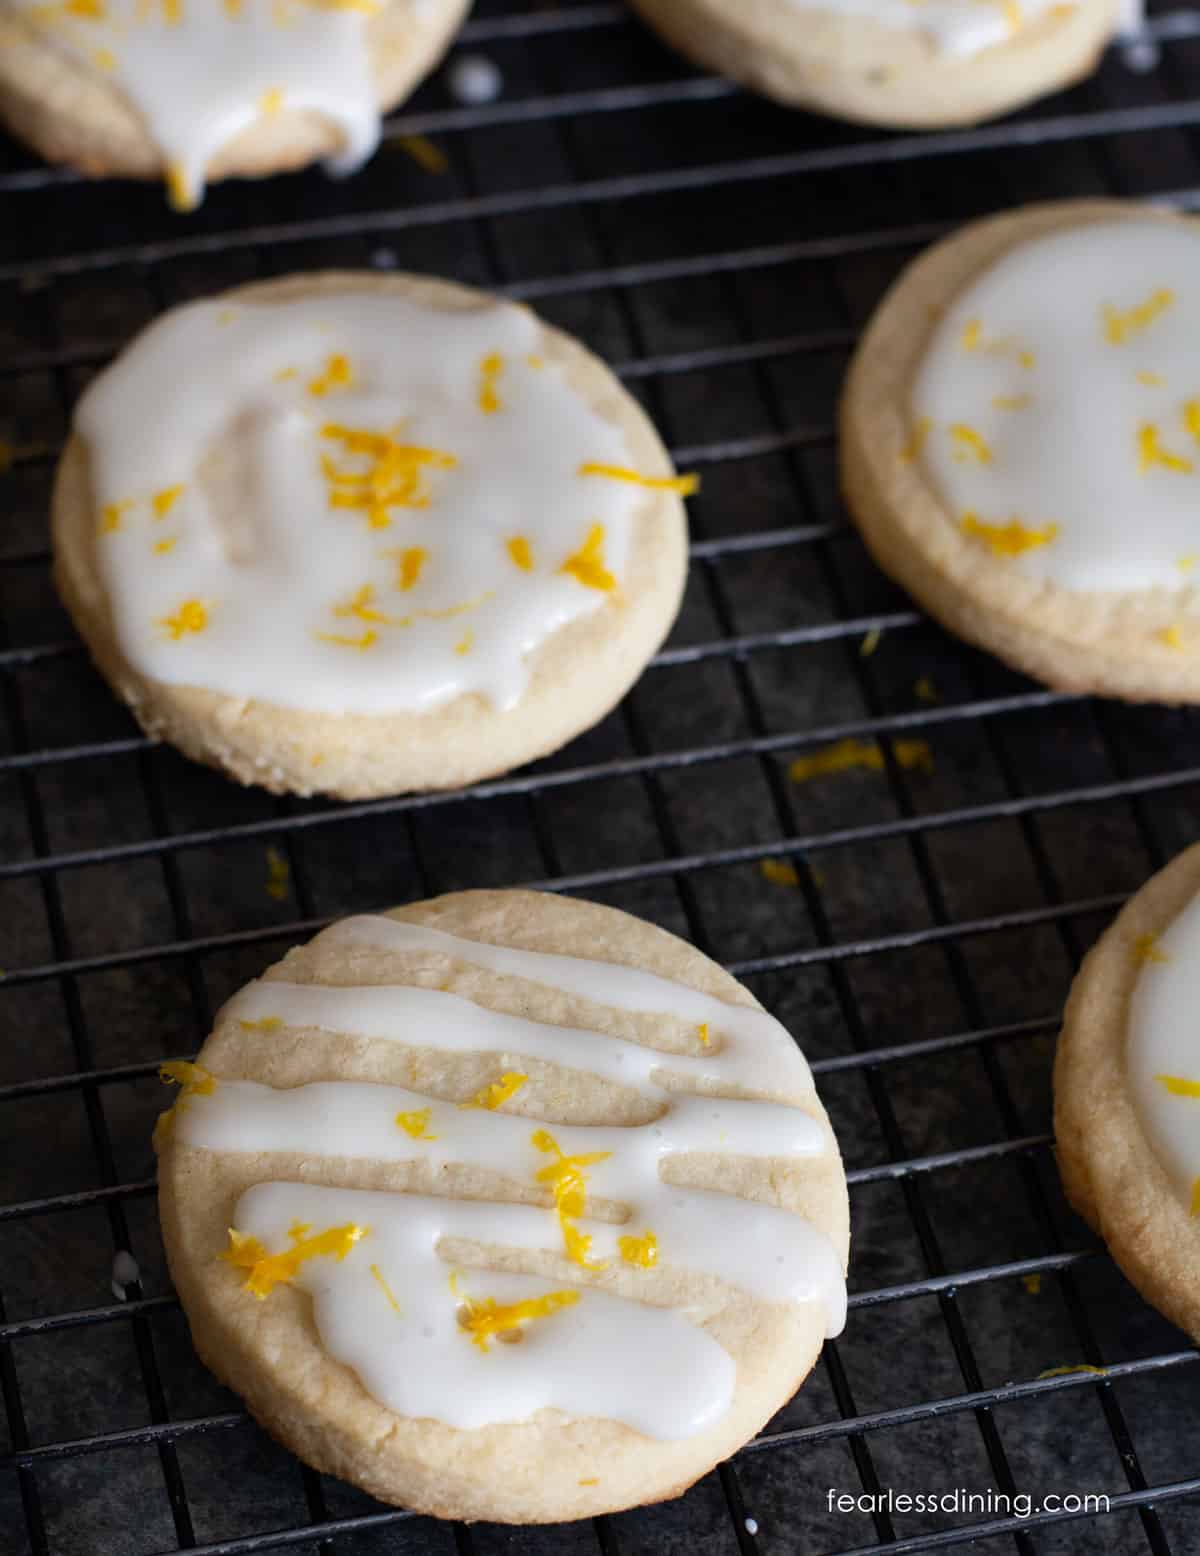 Lemon shortbread cookies on a rack. They have an icing drizzle and lemon zest on top.